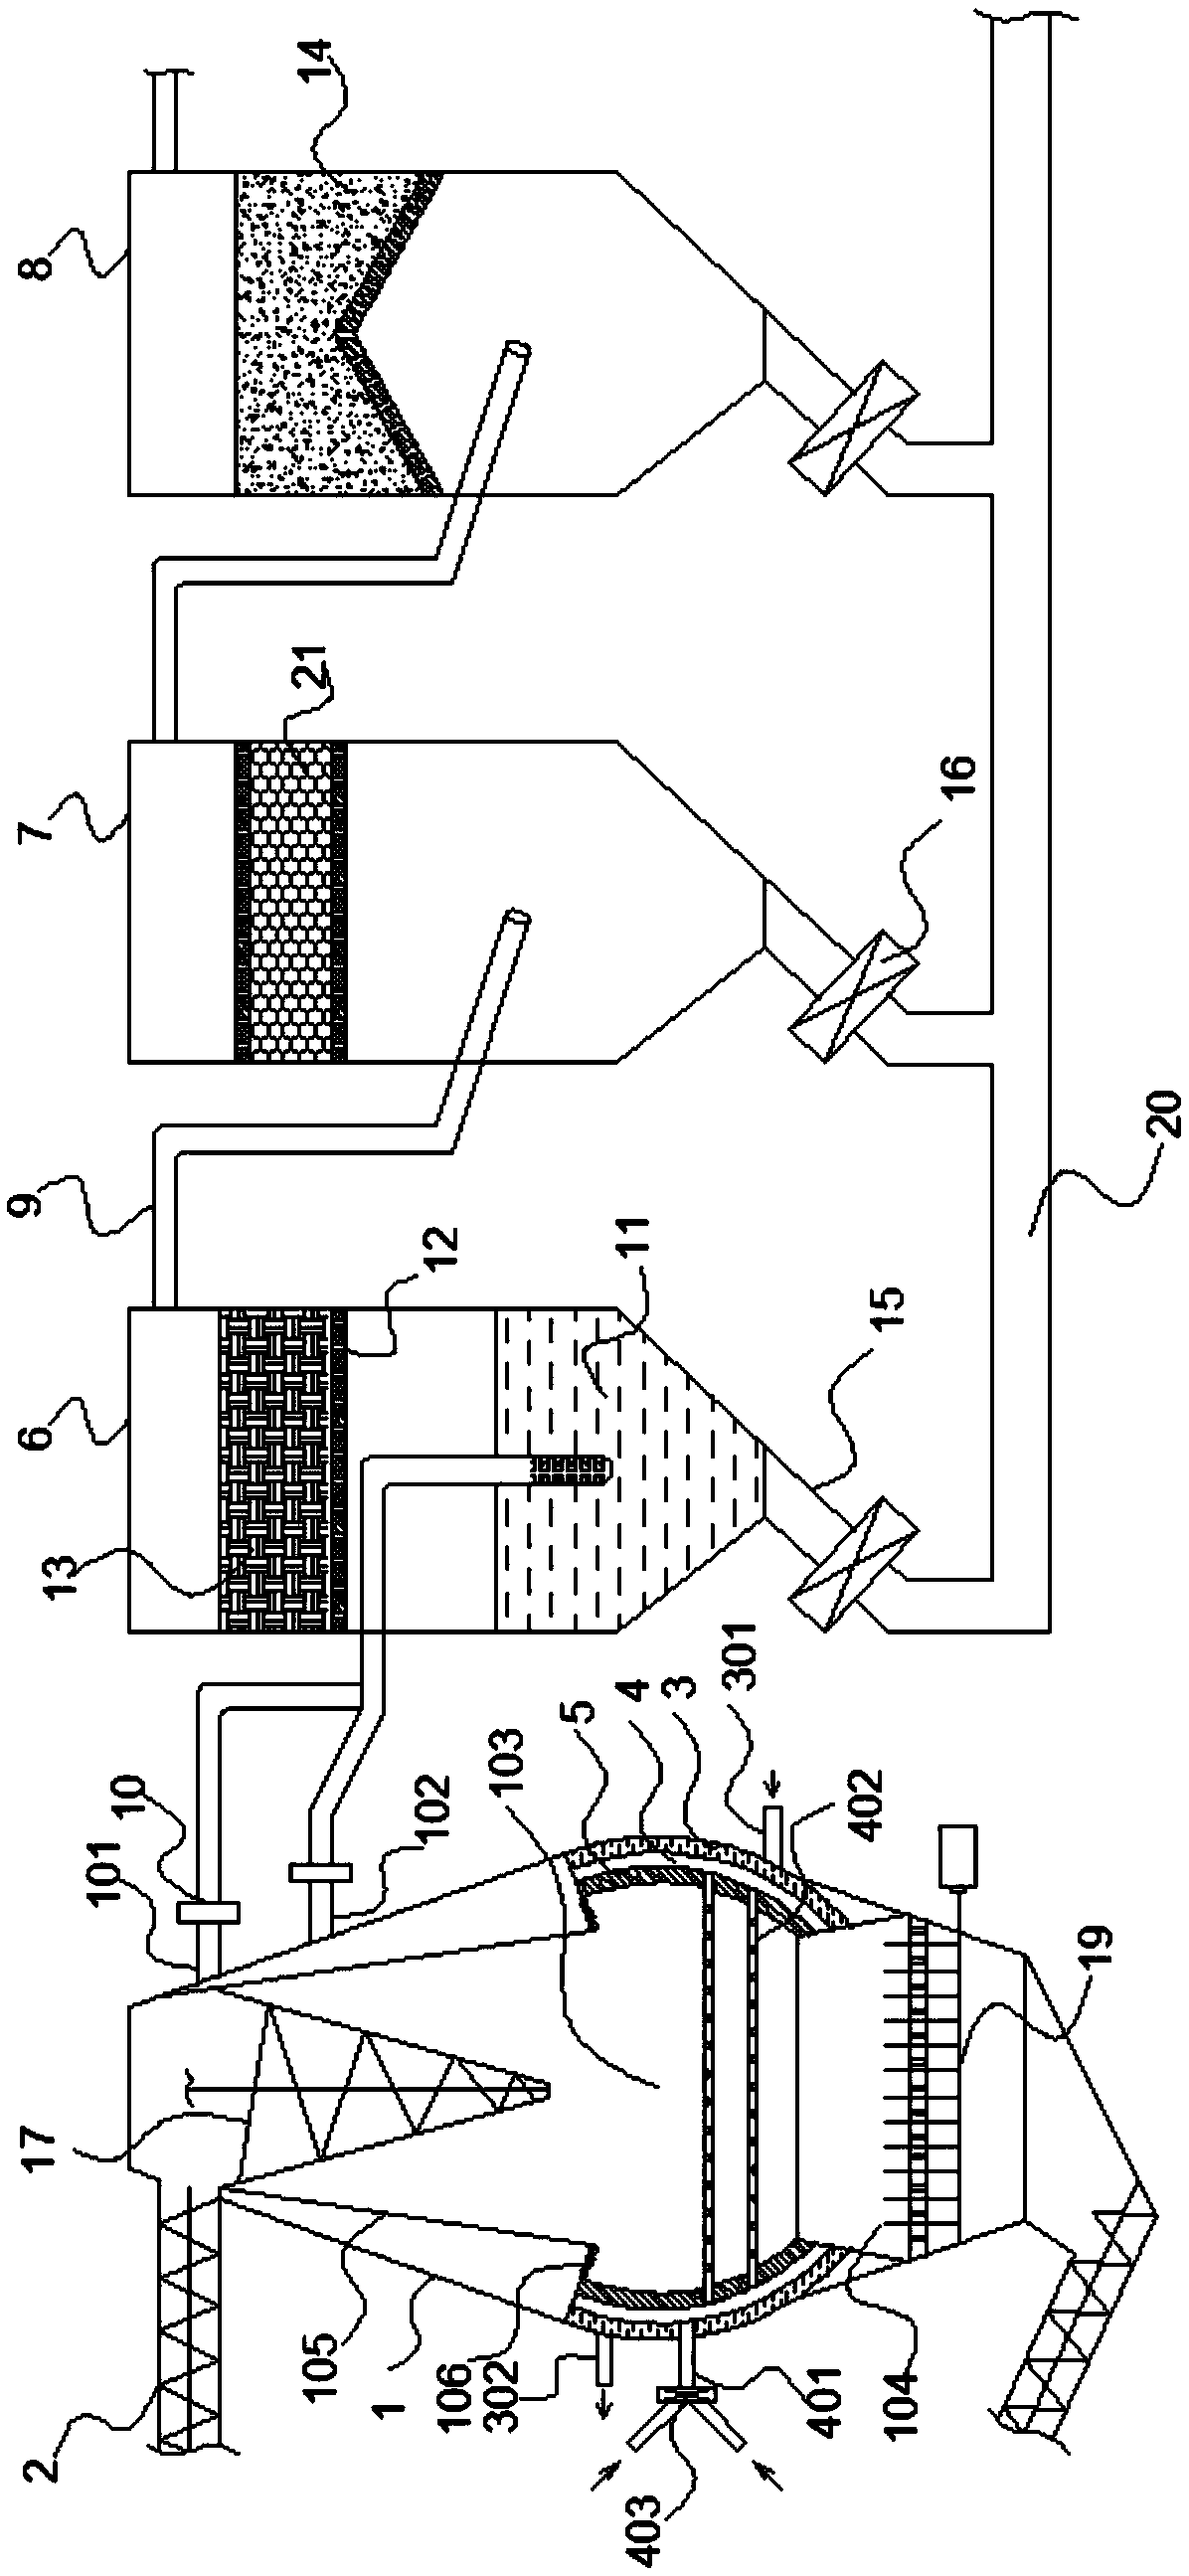 Integrated waste disposal and conversion device